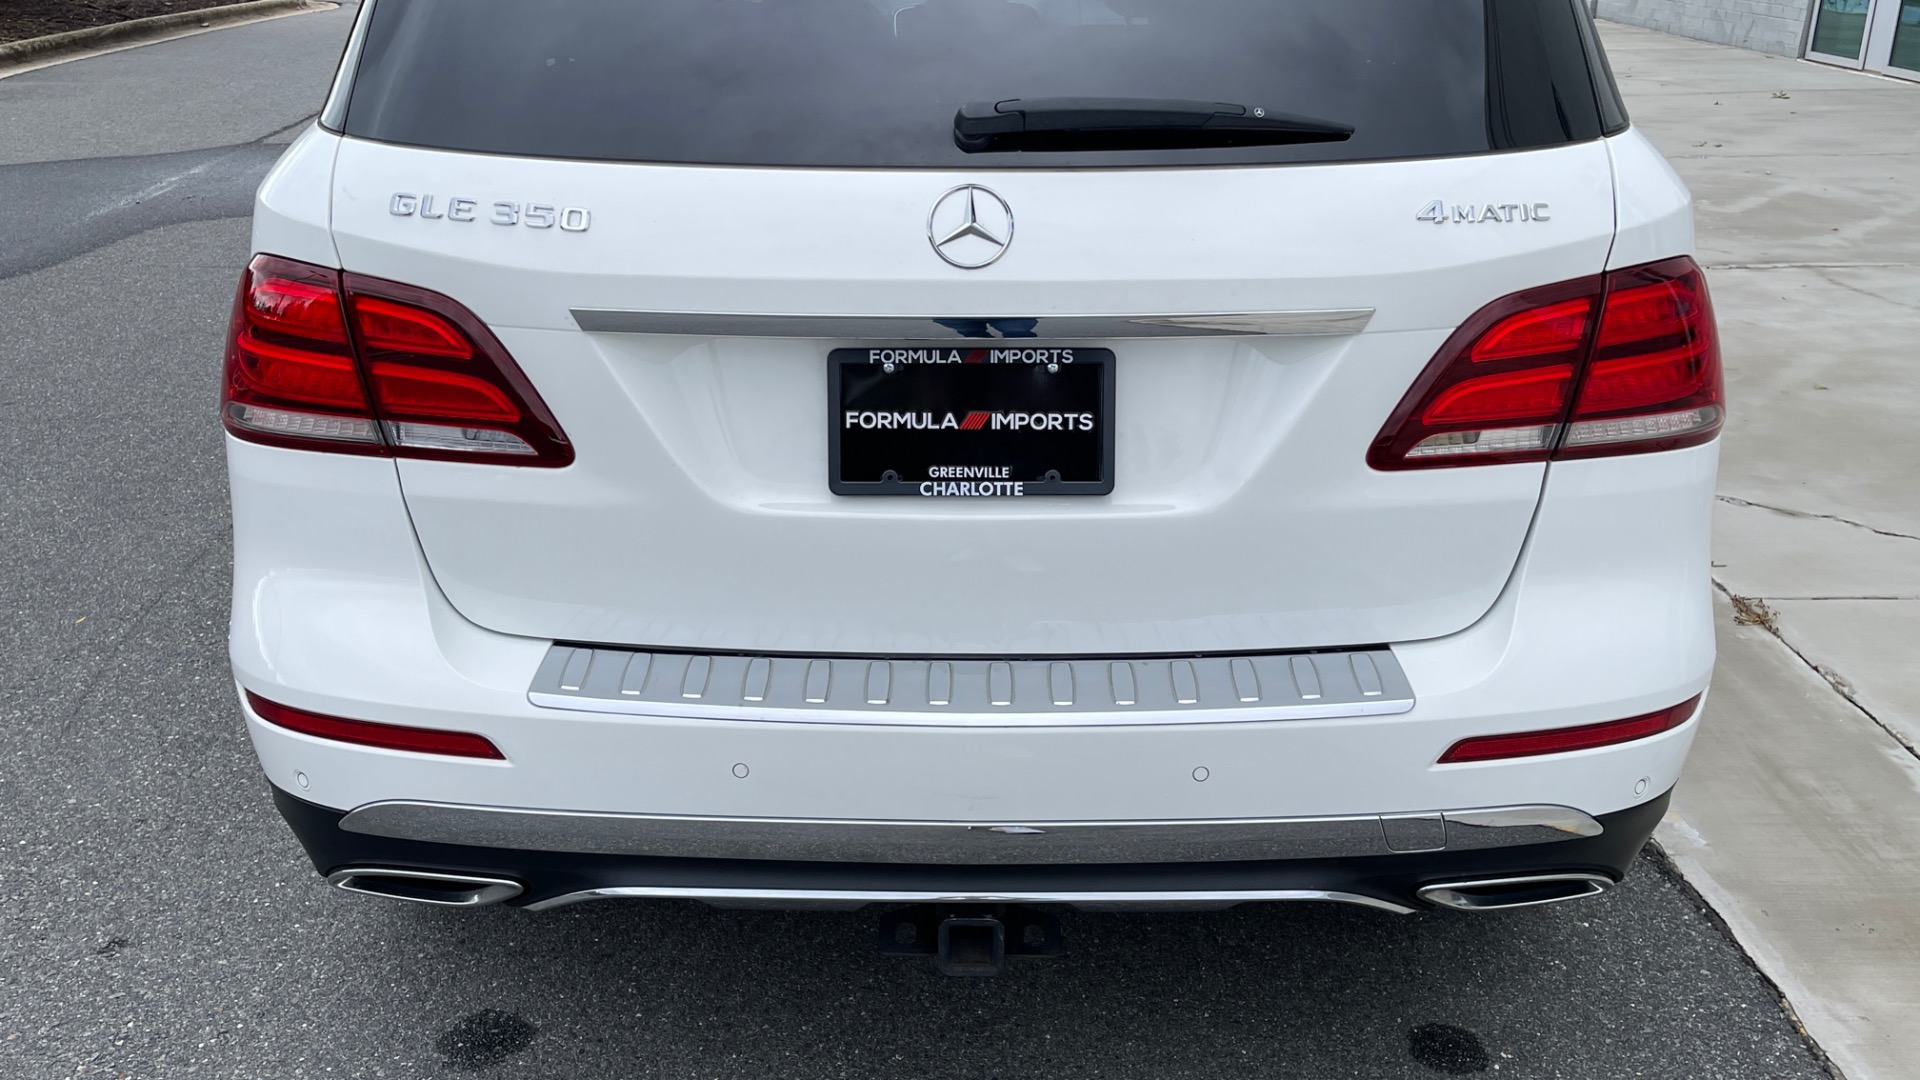 Used 2018 Mercedes-Benz GLE GLE 350 / PREMIUM 2 PACKAGE / PARKING ASSIST / HARMAN KARDON / PANO ROOF for sale Sold at Formula Imports in Charlotte NC 28227 7